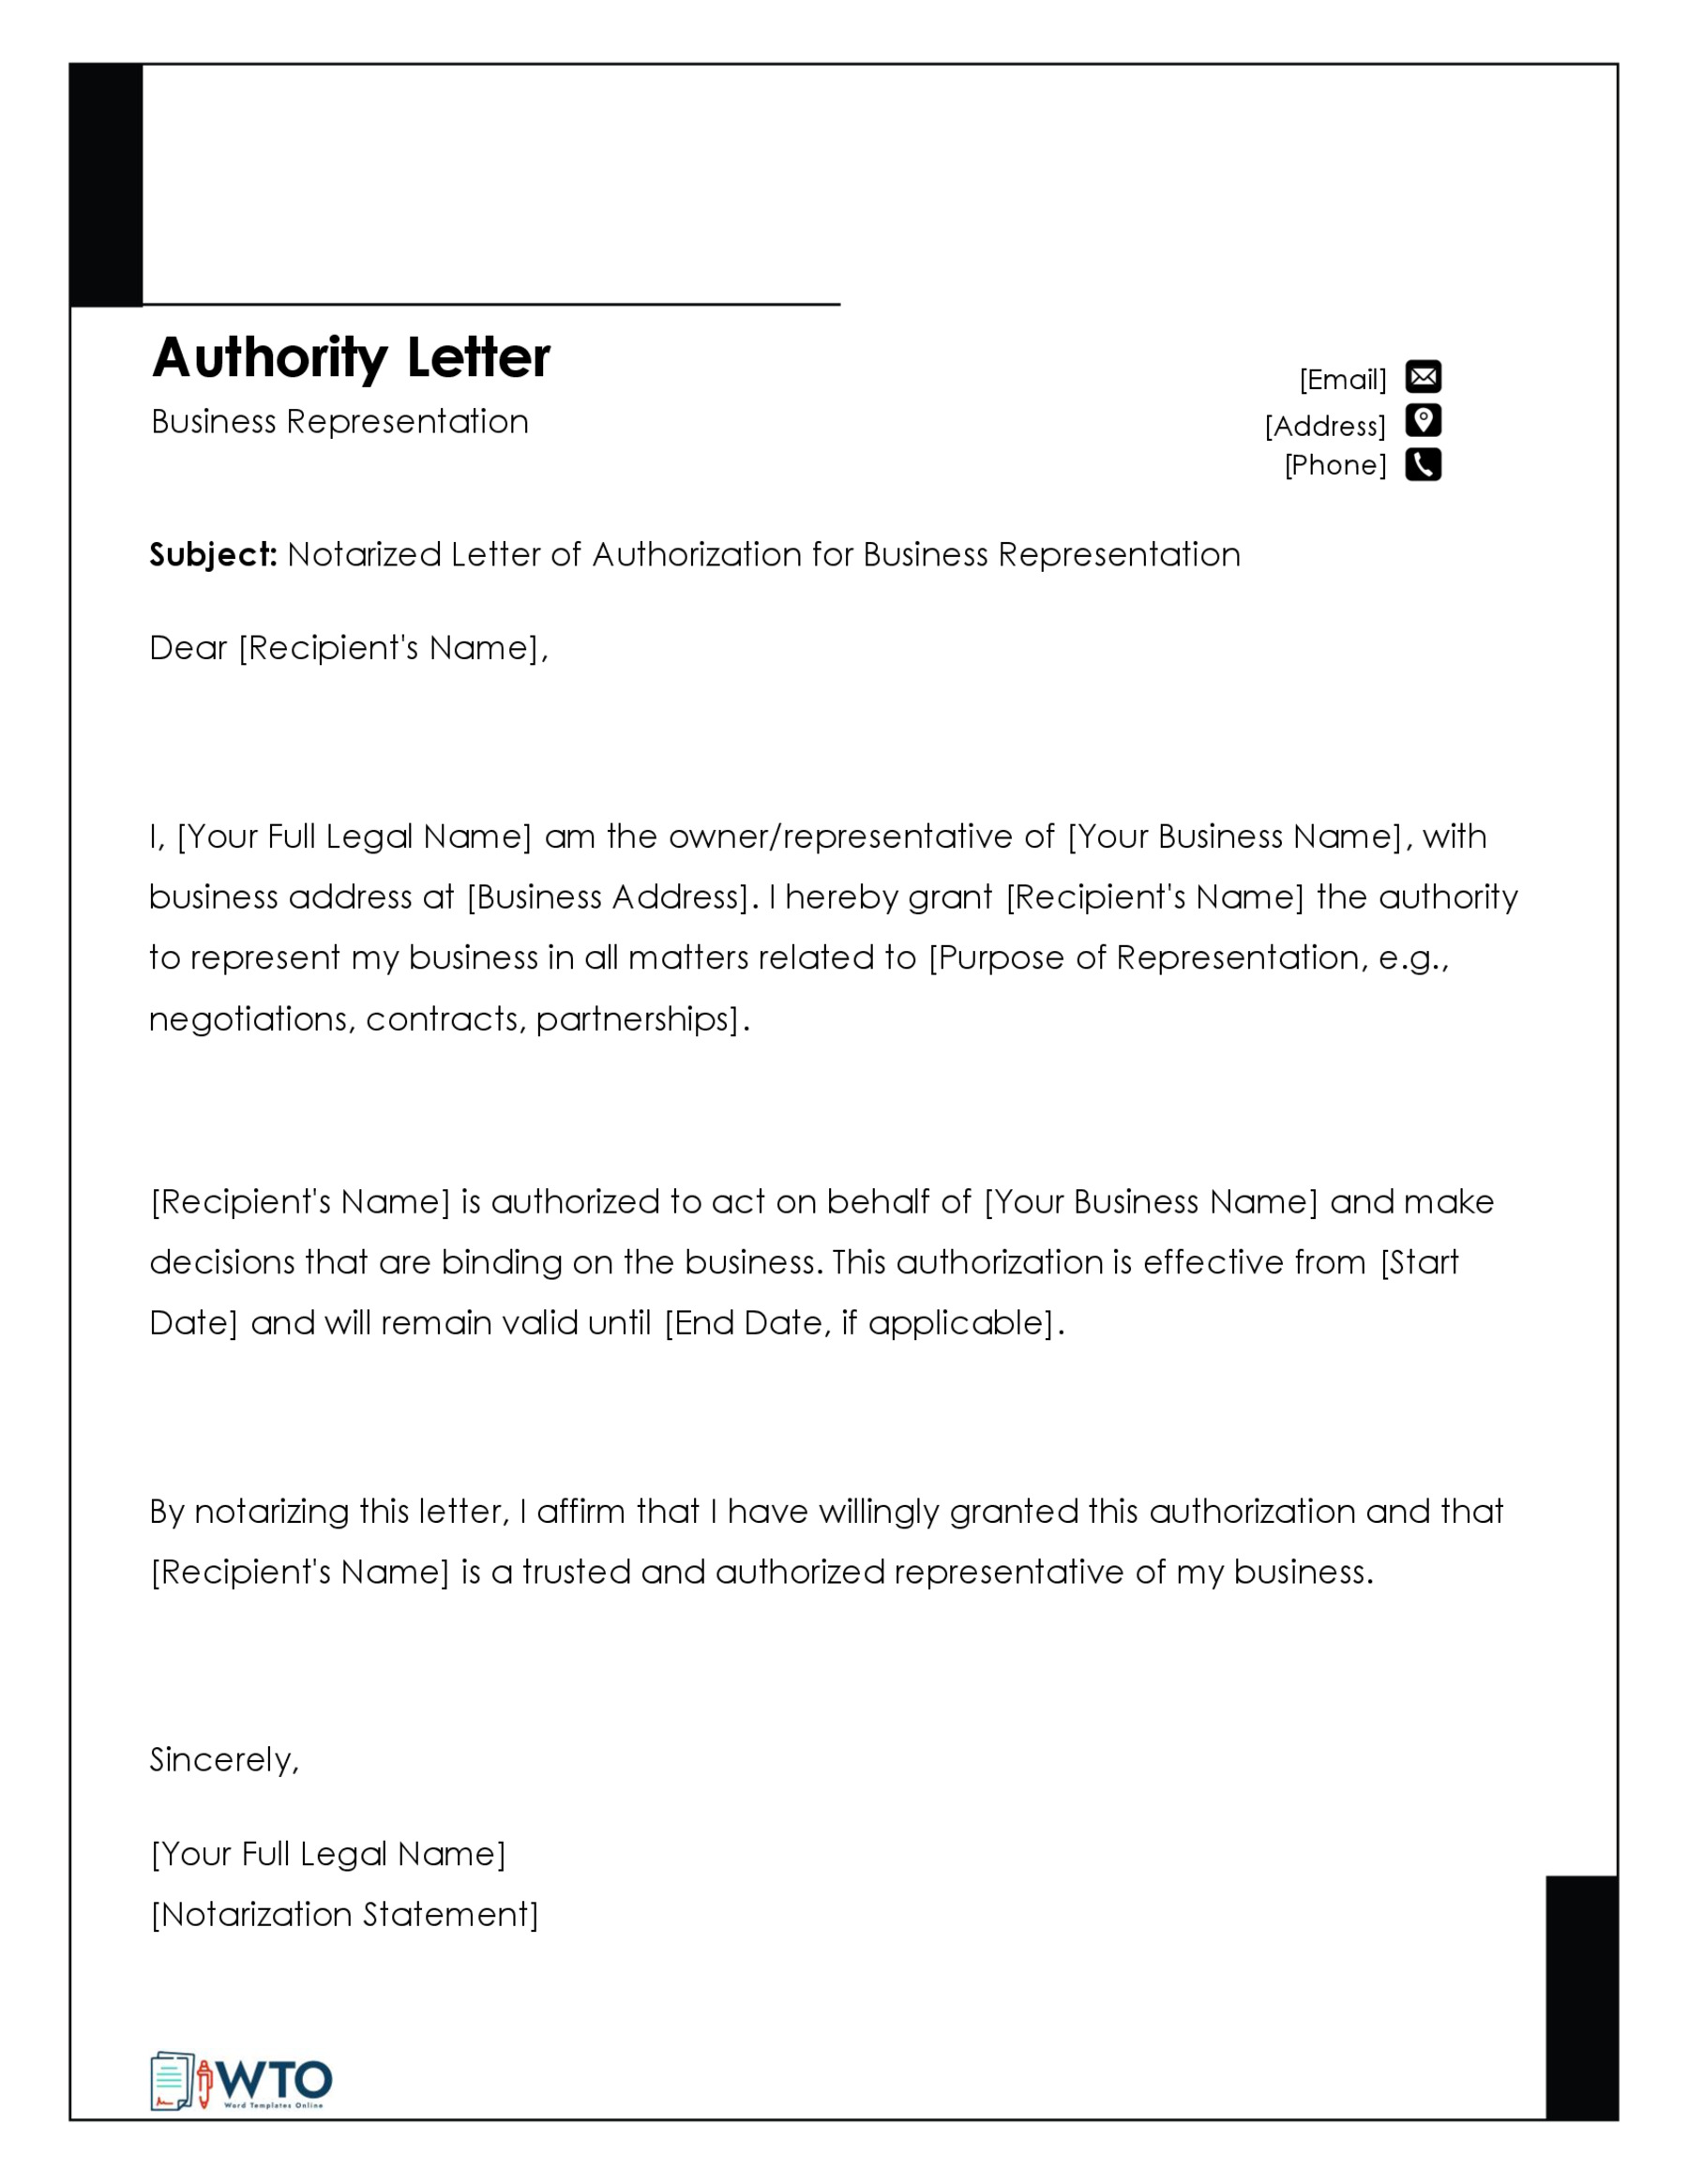 Notarized letter of authorization tamplate-Downloadable